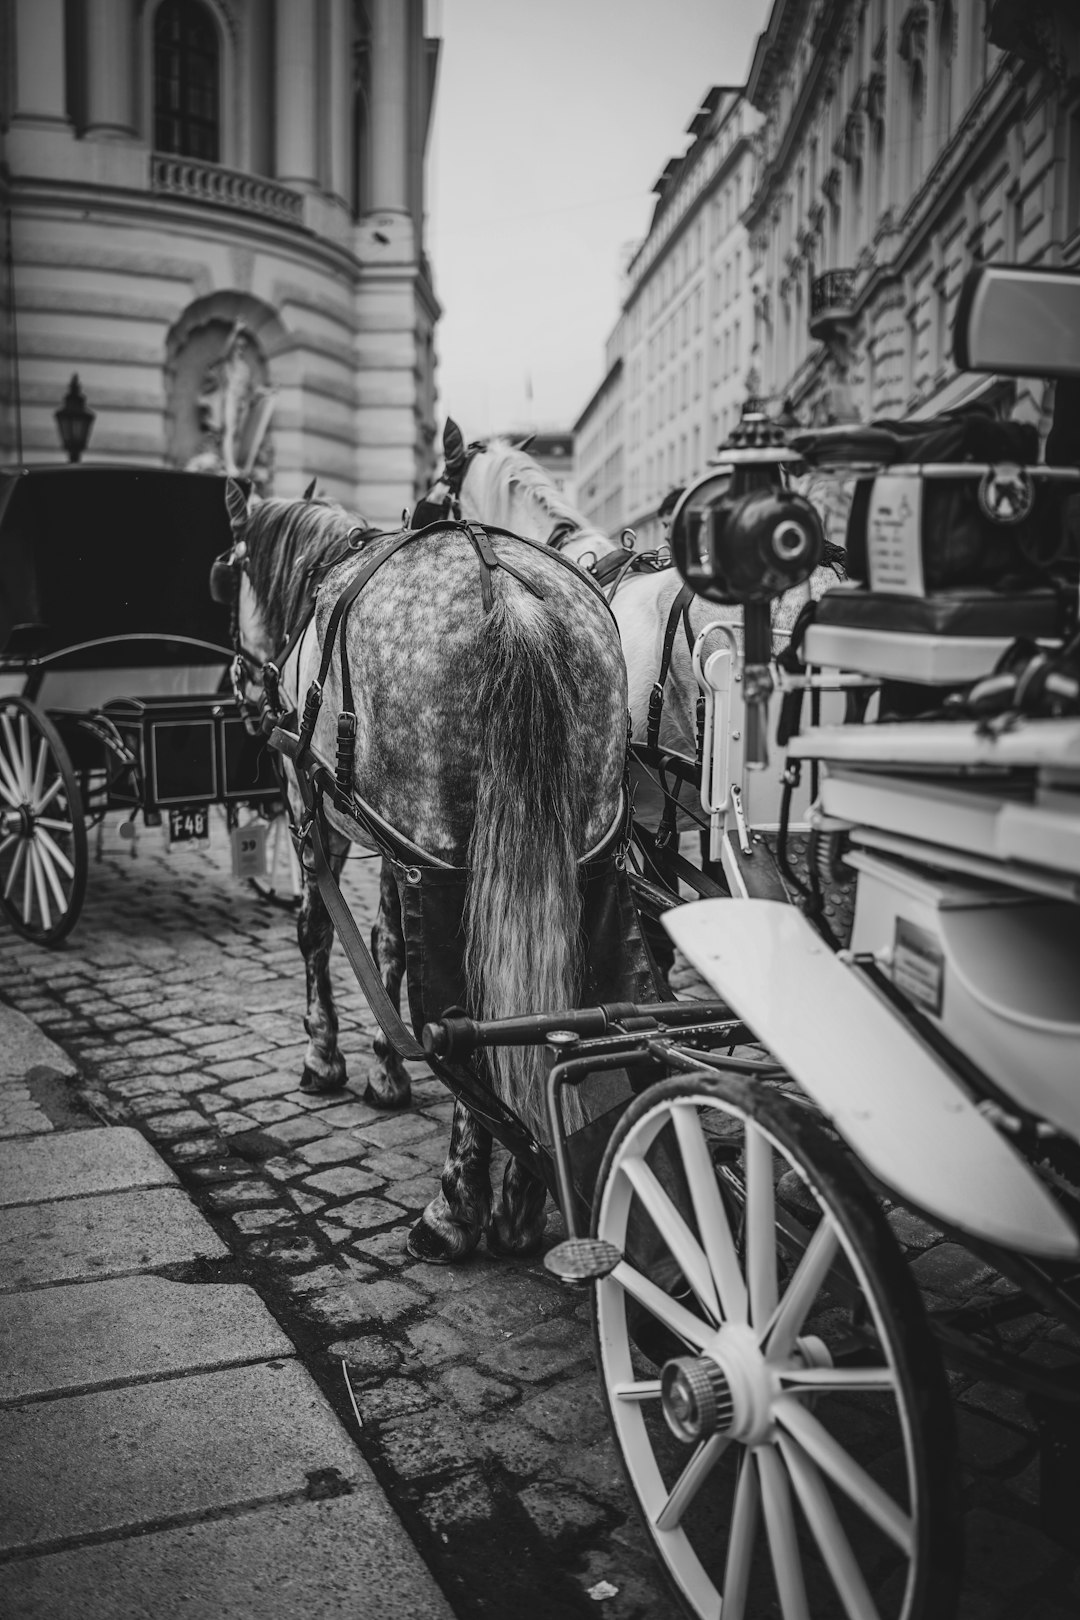 grayscale photography of horse and carriage near buildings